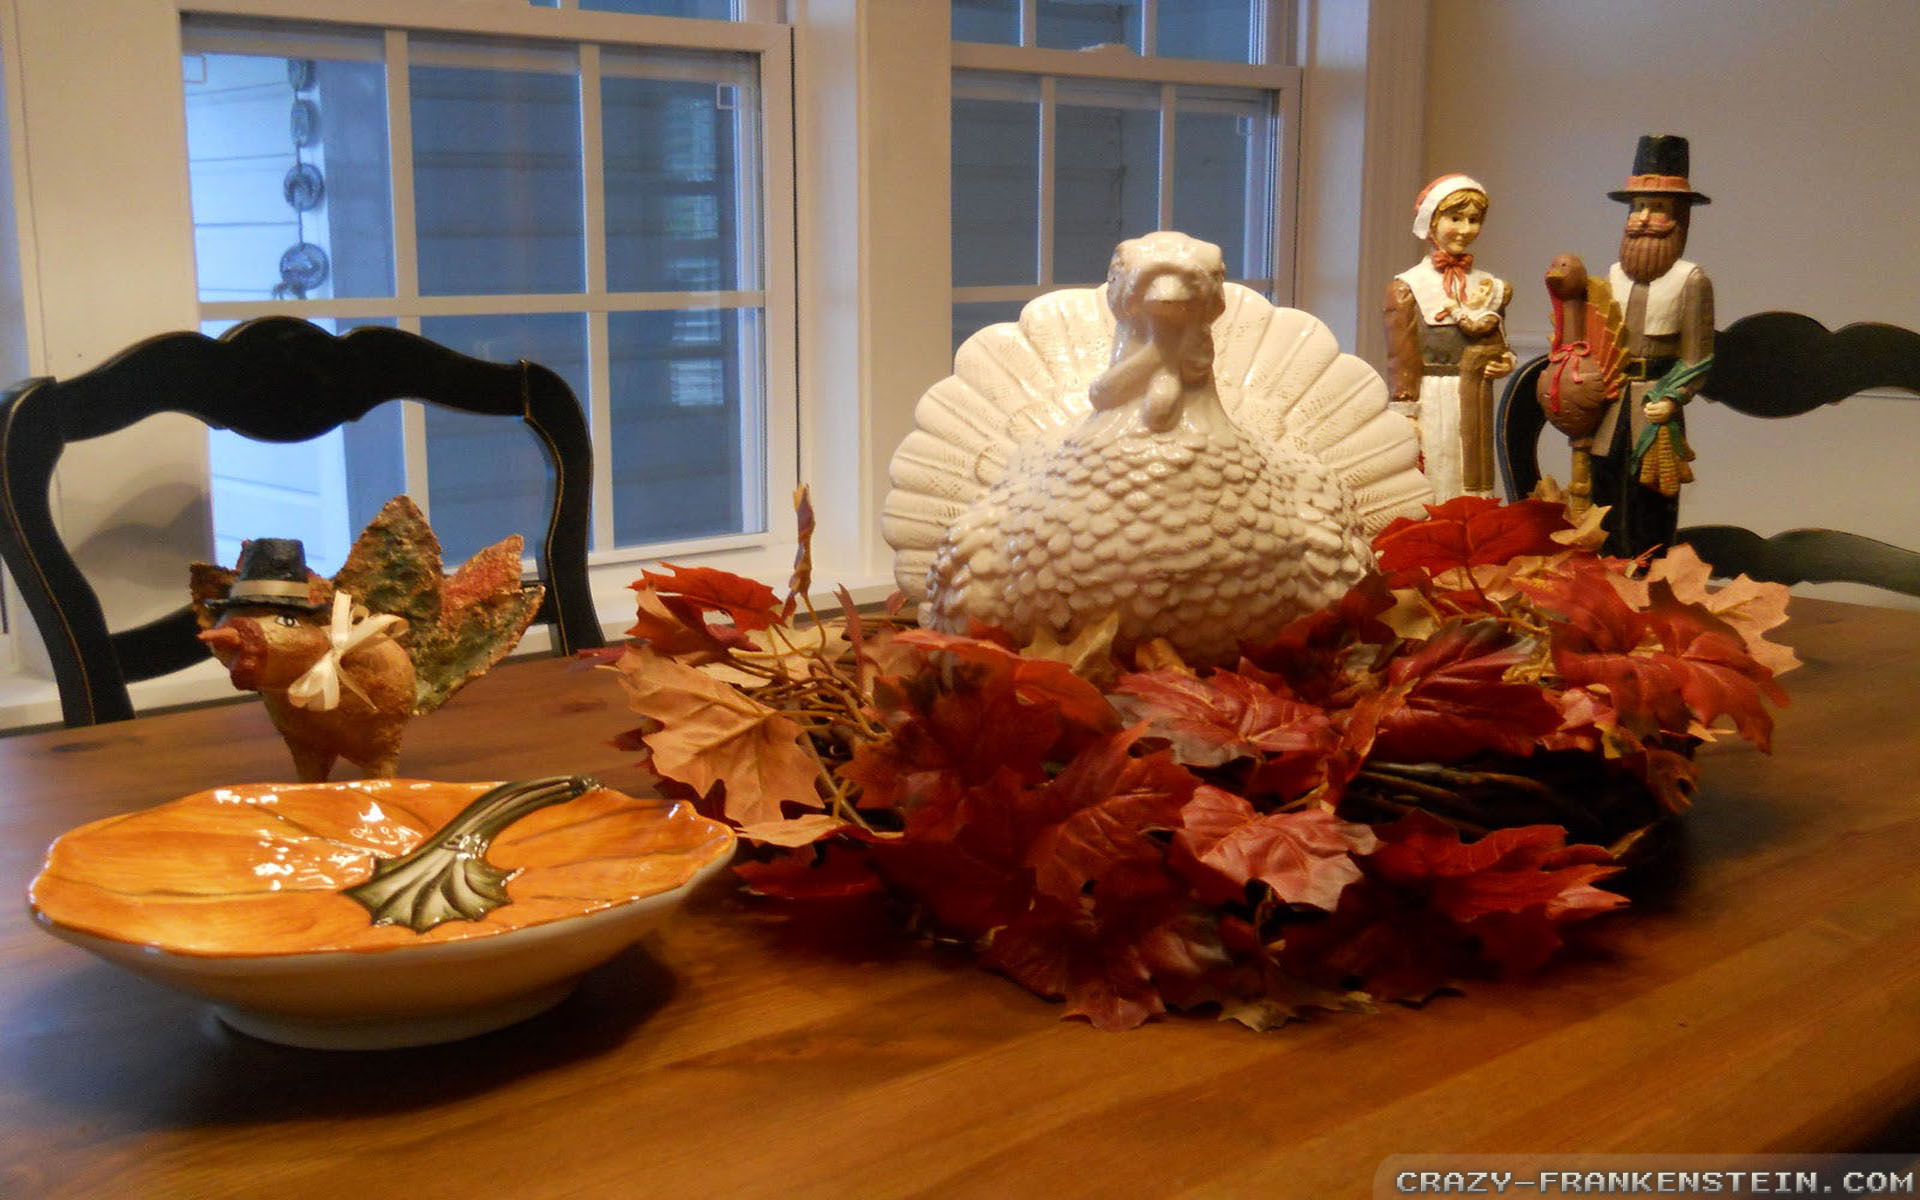 Thanksgiving Day Decorations wallpapers   Crazy Frankenstein